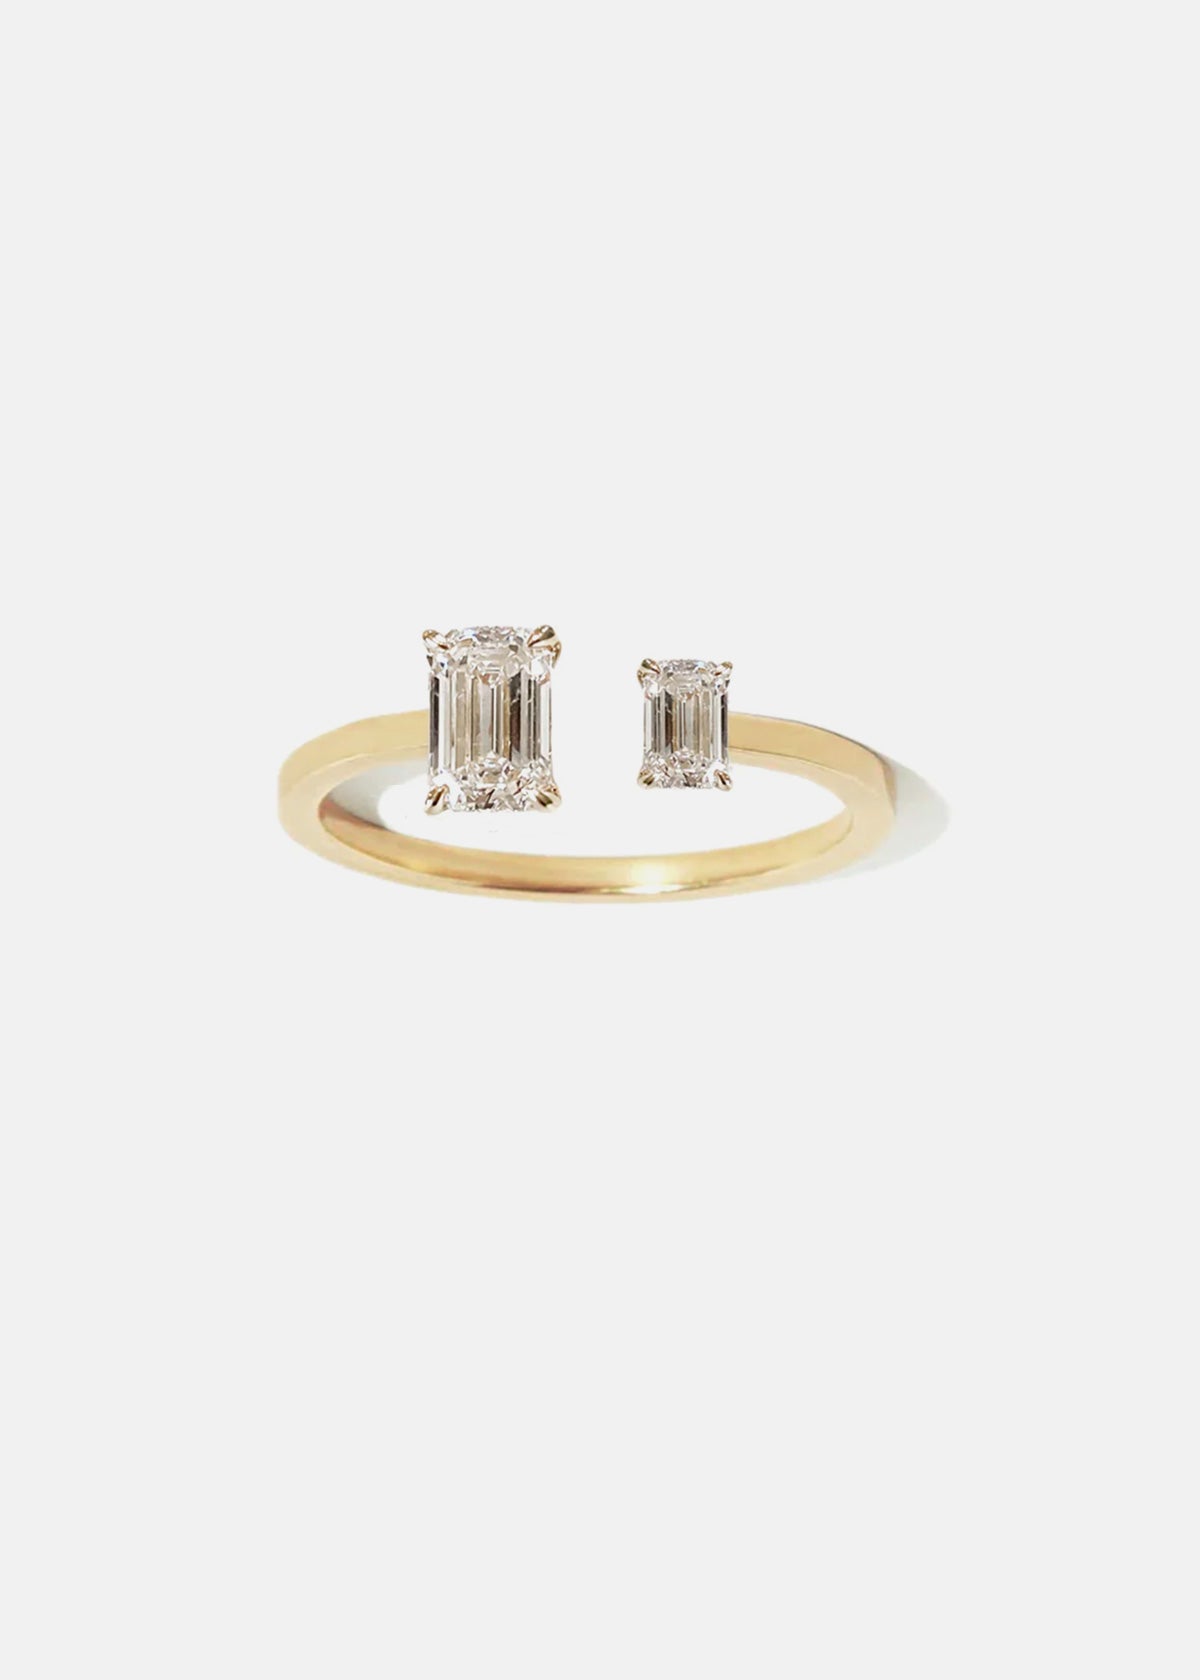 Vintage Cartier Love Me Ring Set in 18k White and Yellow Gold at 1stDibs |  love me cartier ring, i love me ring, cartier ring me